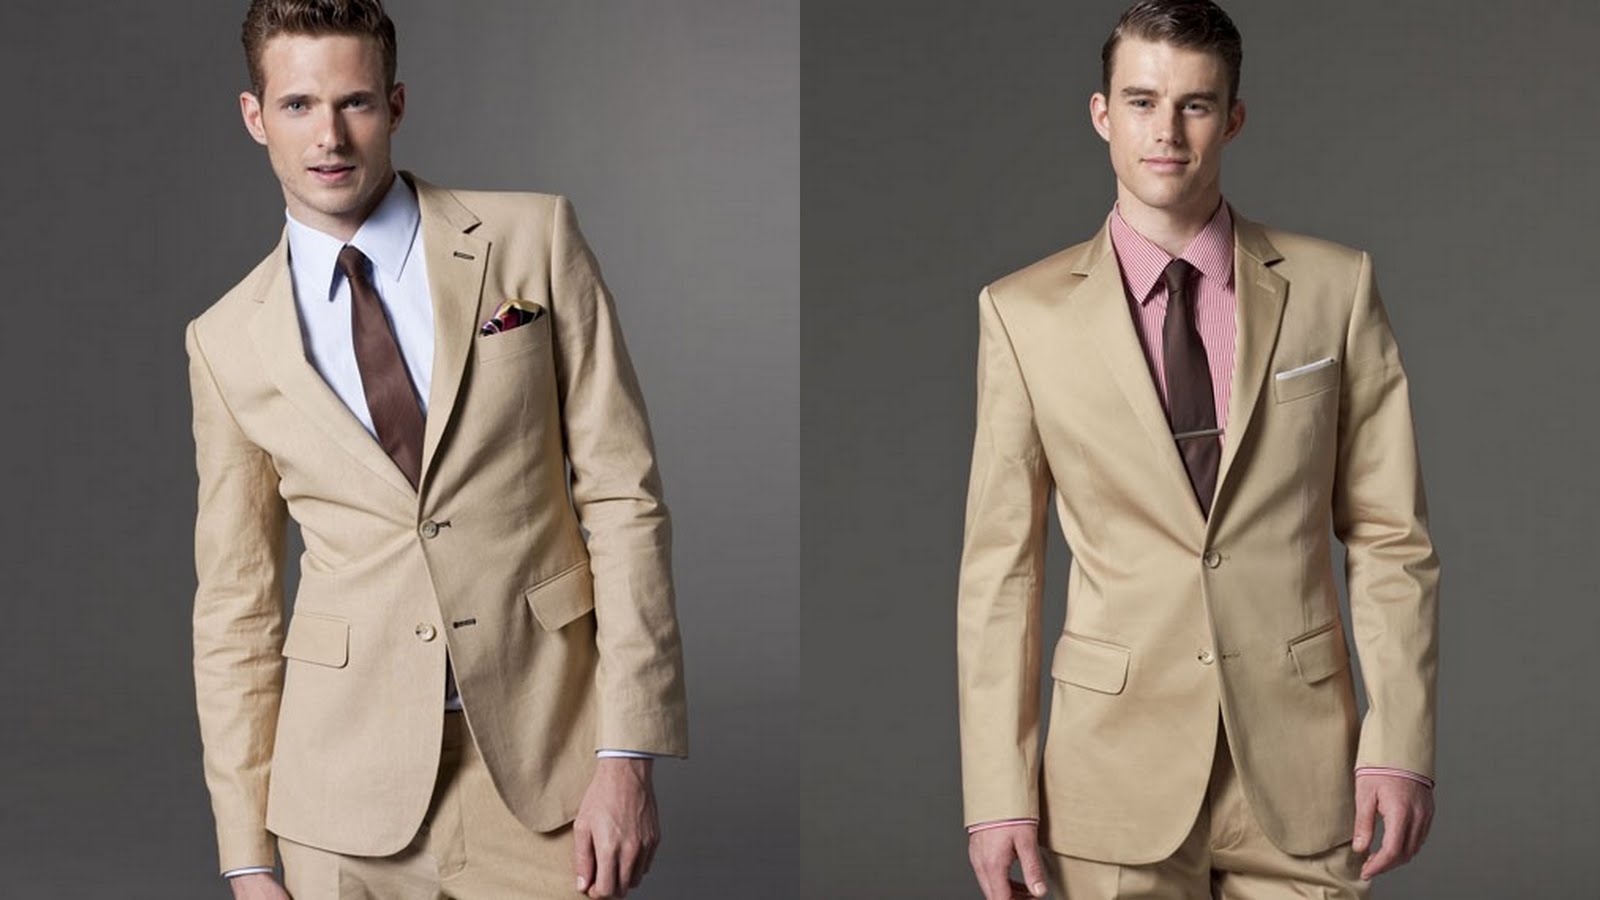 Indochino wants you to look cool when it's hot